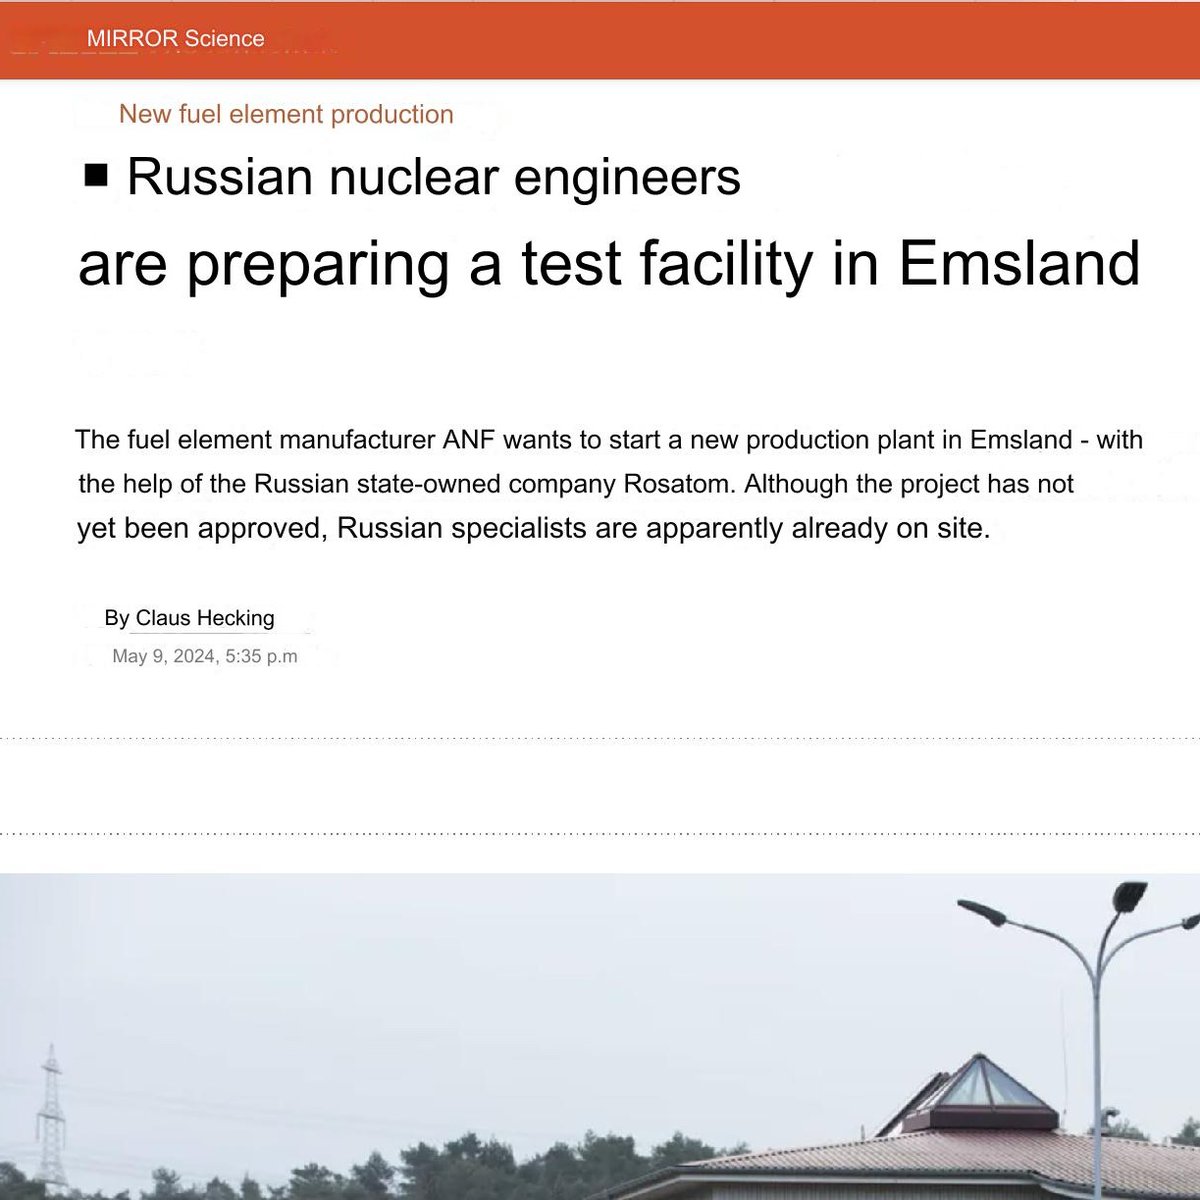 Germany reportedly allows employees of Russian state-owned nuclear corporation #Rosatom, which is responsible for hijacking of Ukrainian #ZaporizhzhyaNPP and therefore nuclear blackmailing, to enter Germany's nuclear facility, as a part of Germany-Russia nuclear cooperation.